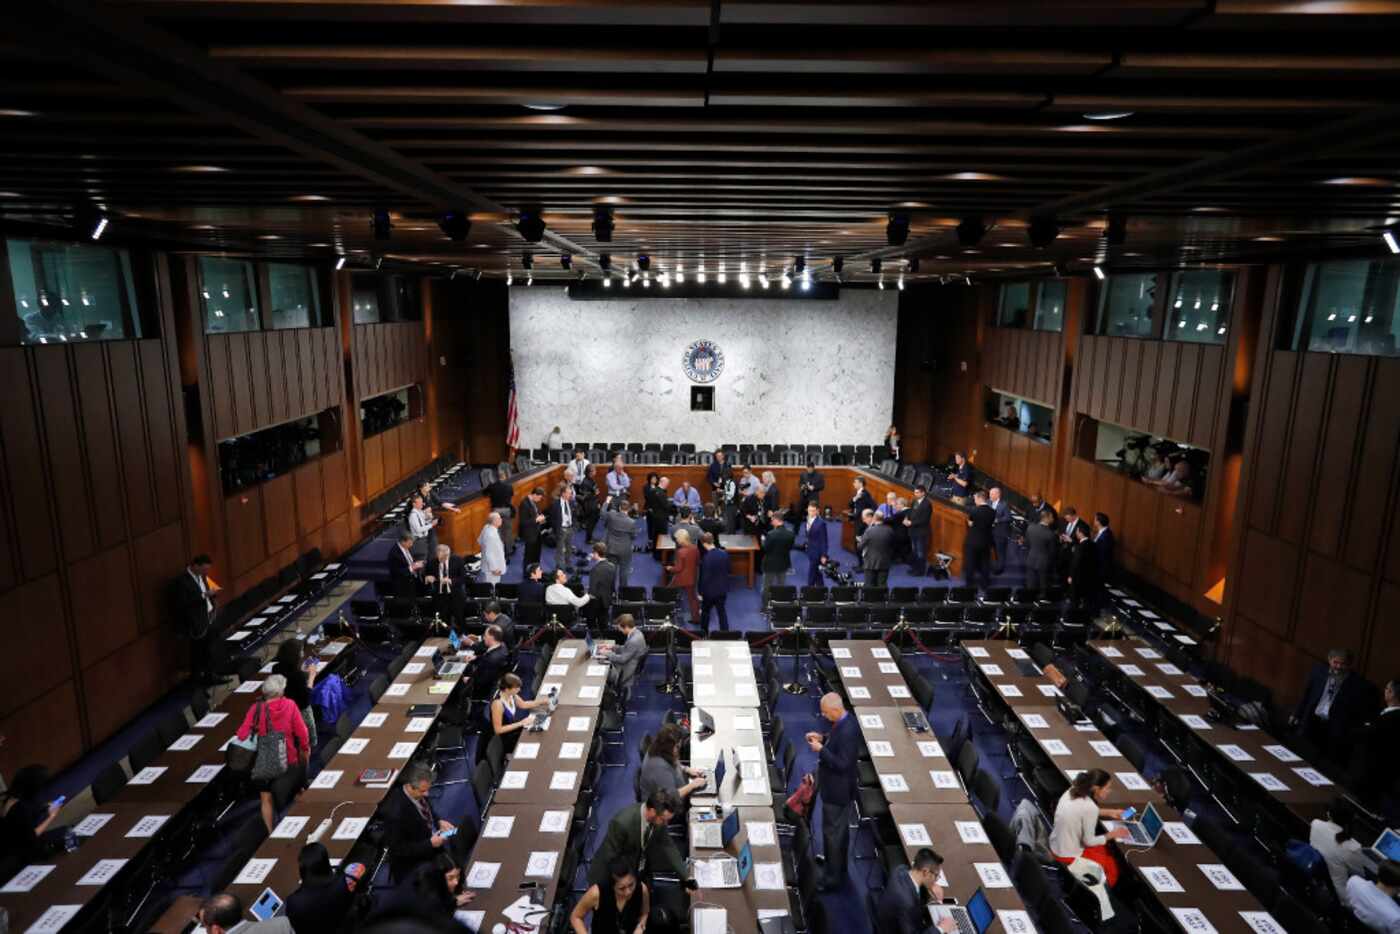 The hearing room was prepared for former FBI Director James Comey's appearance before the...